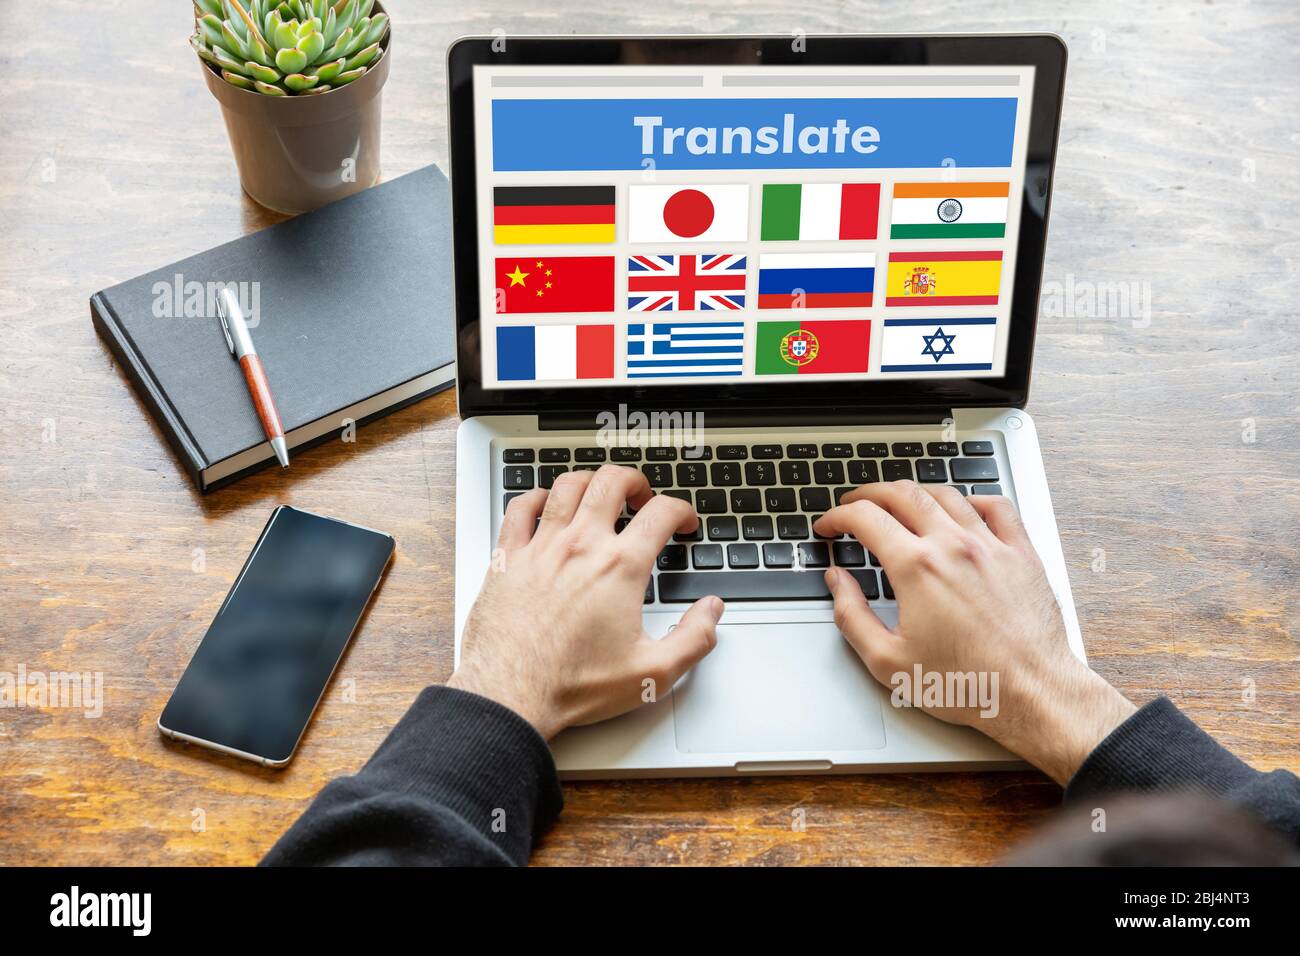 Online translation, foreign languages learning concept. Man working with a computer laptop, translate text on the screen. Stock Photo